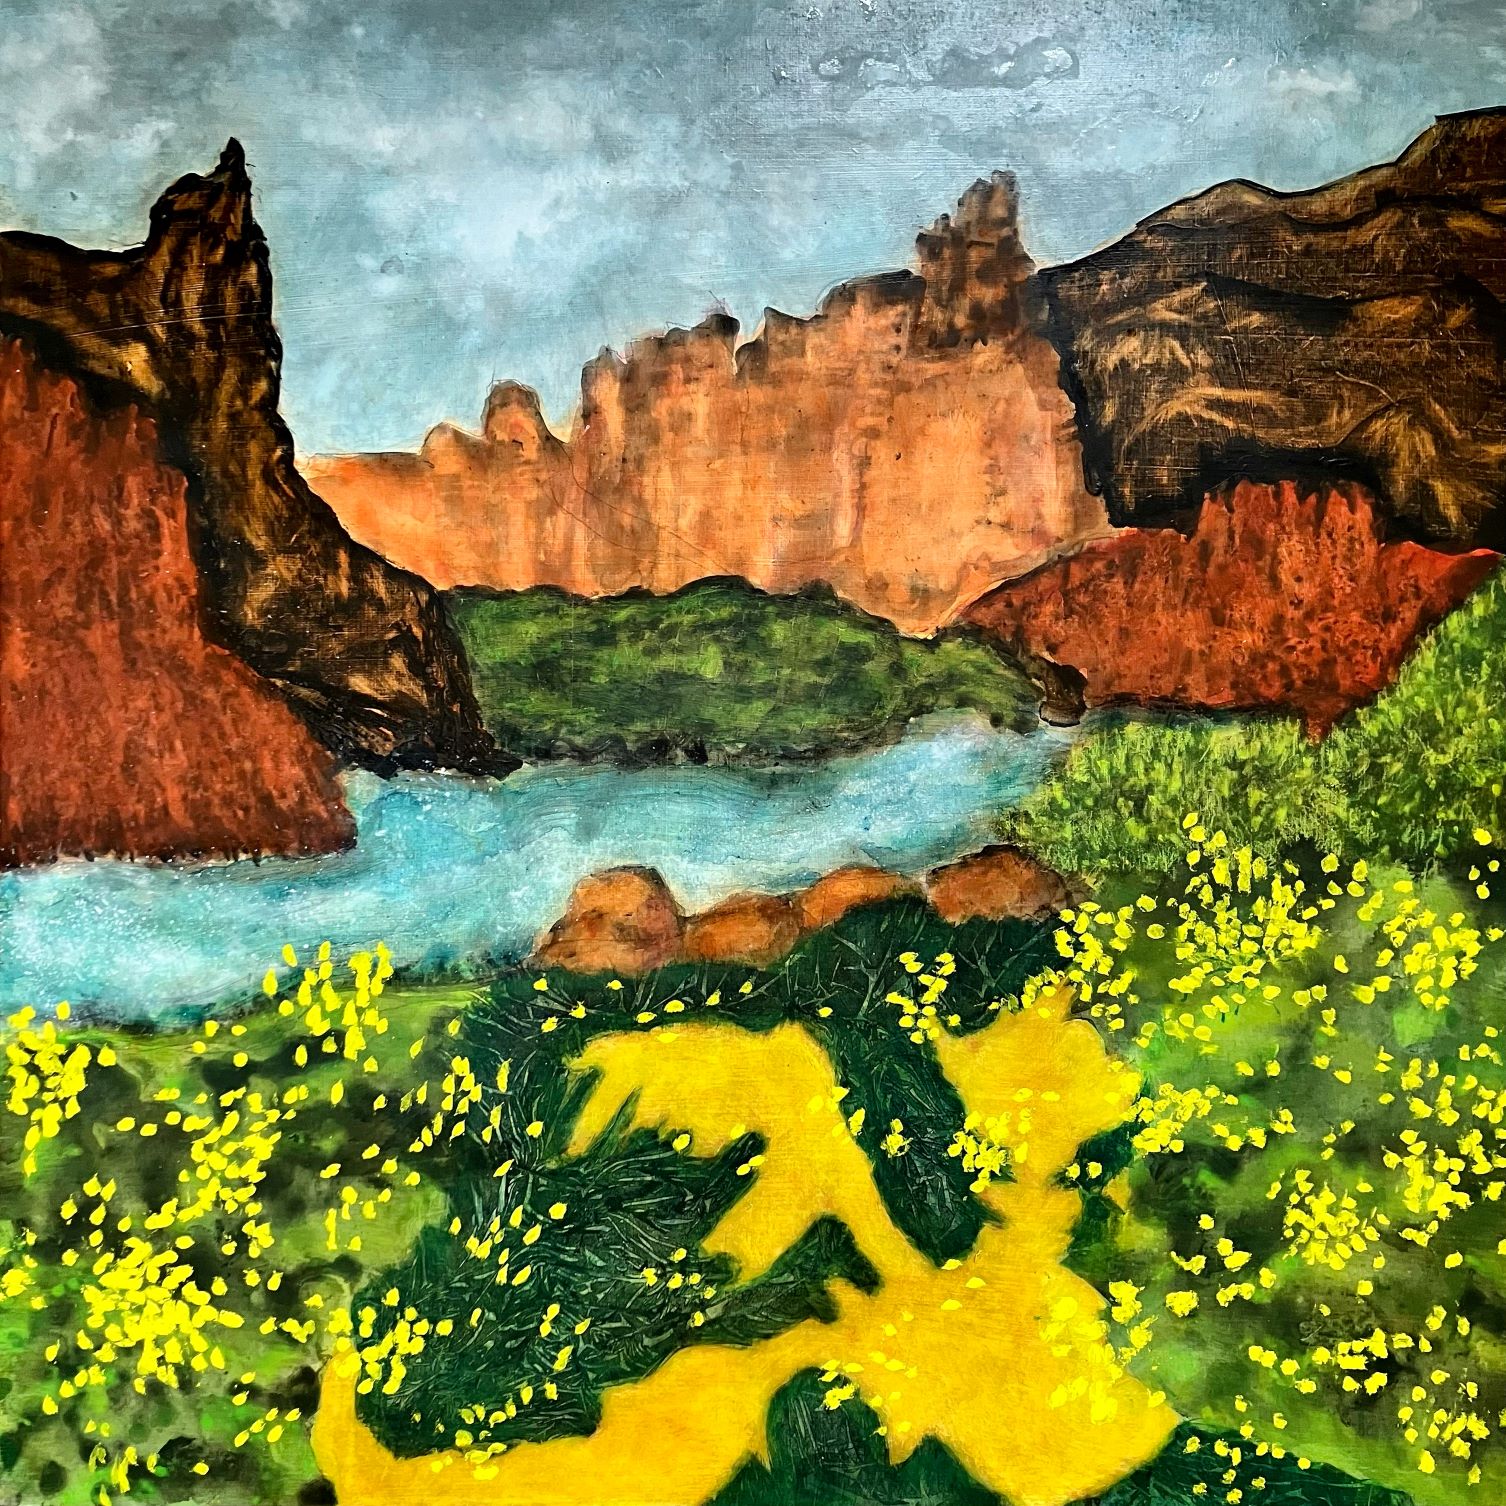 Canyon mountains, river, grassy fields with yellow flowers